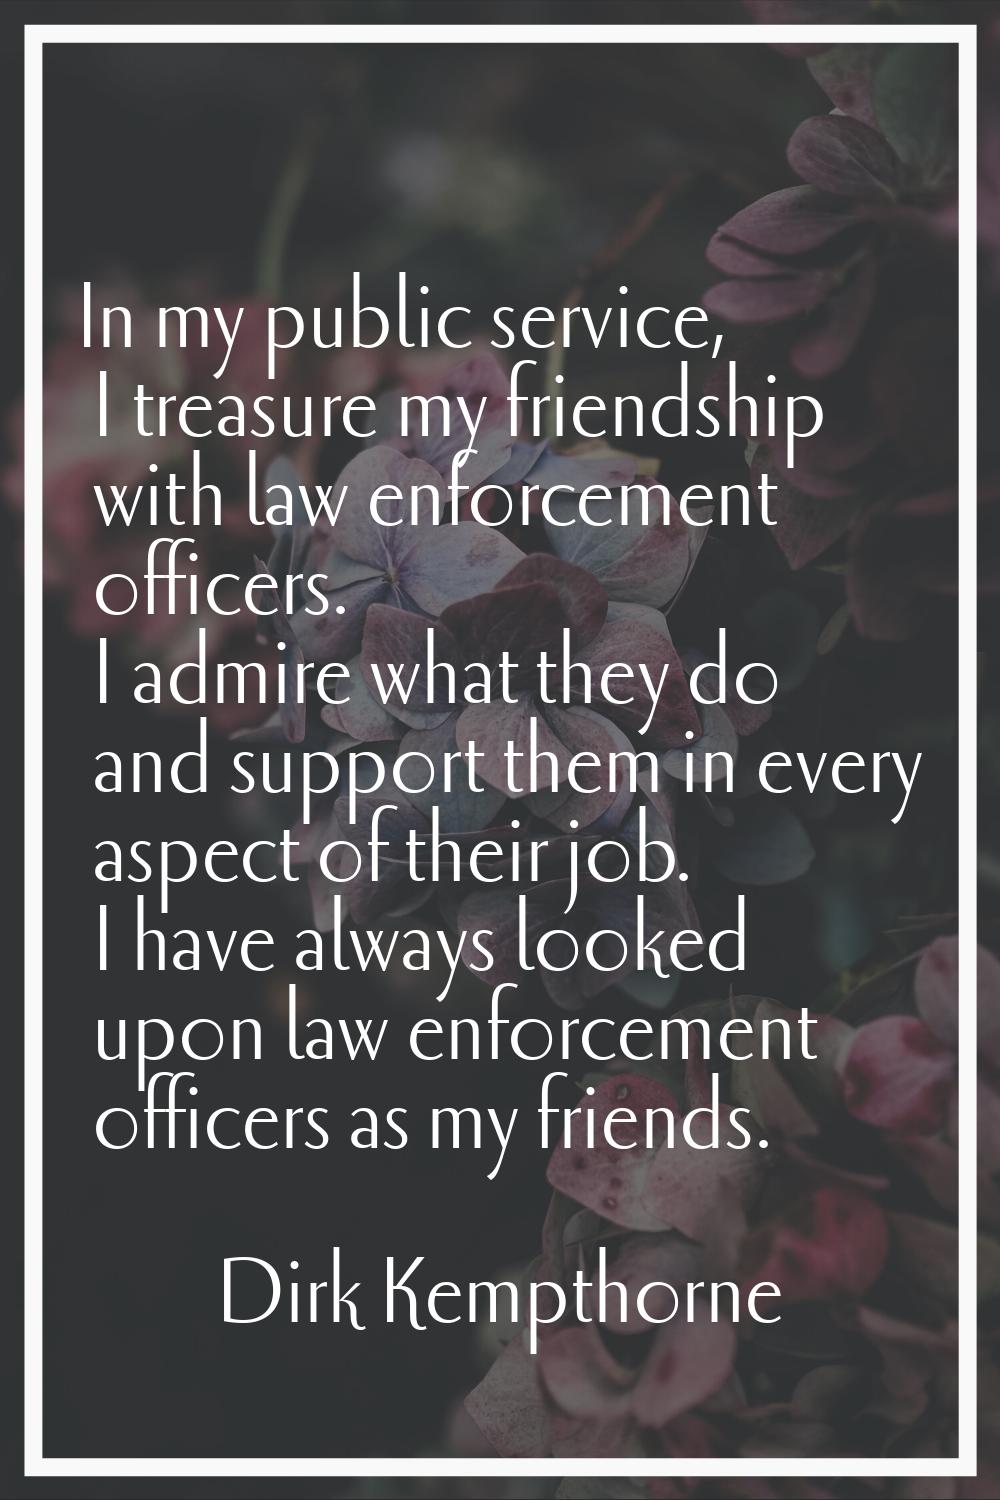 In my public service, I treasure my friendship with law enforcement officers. I admire what they do